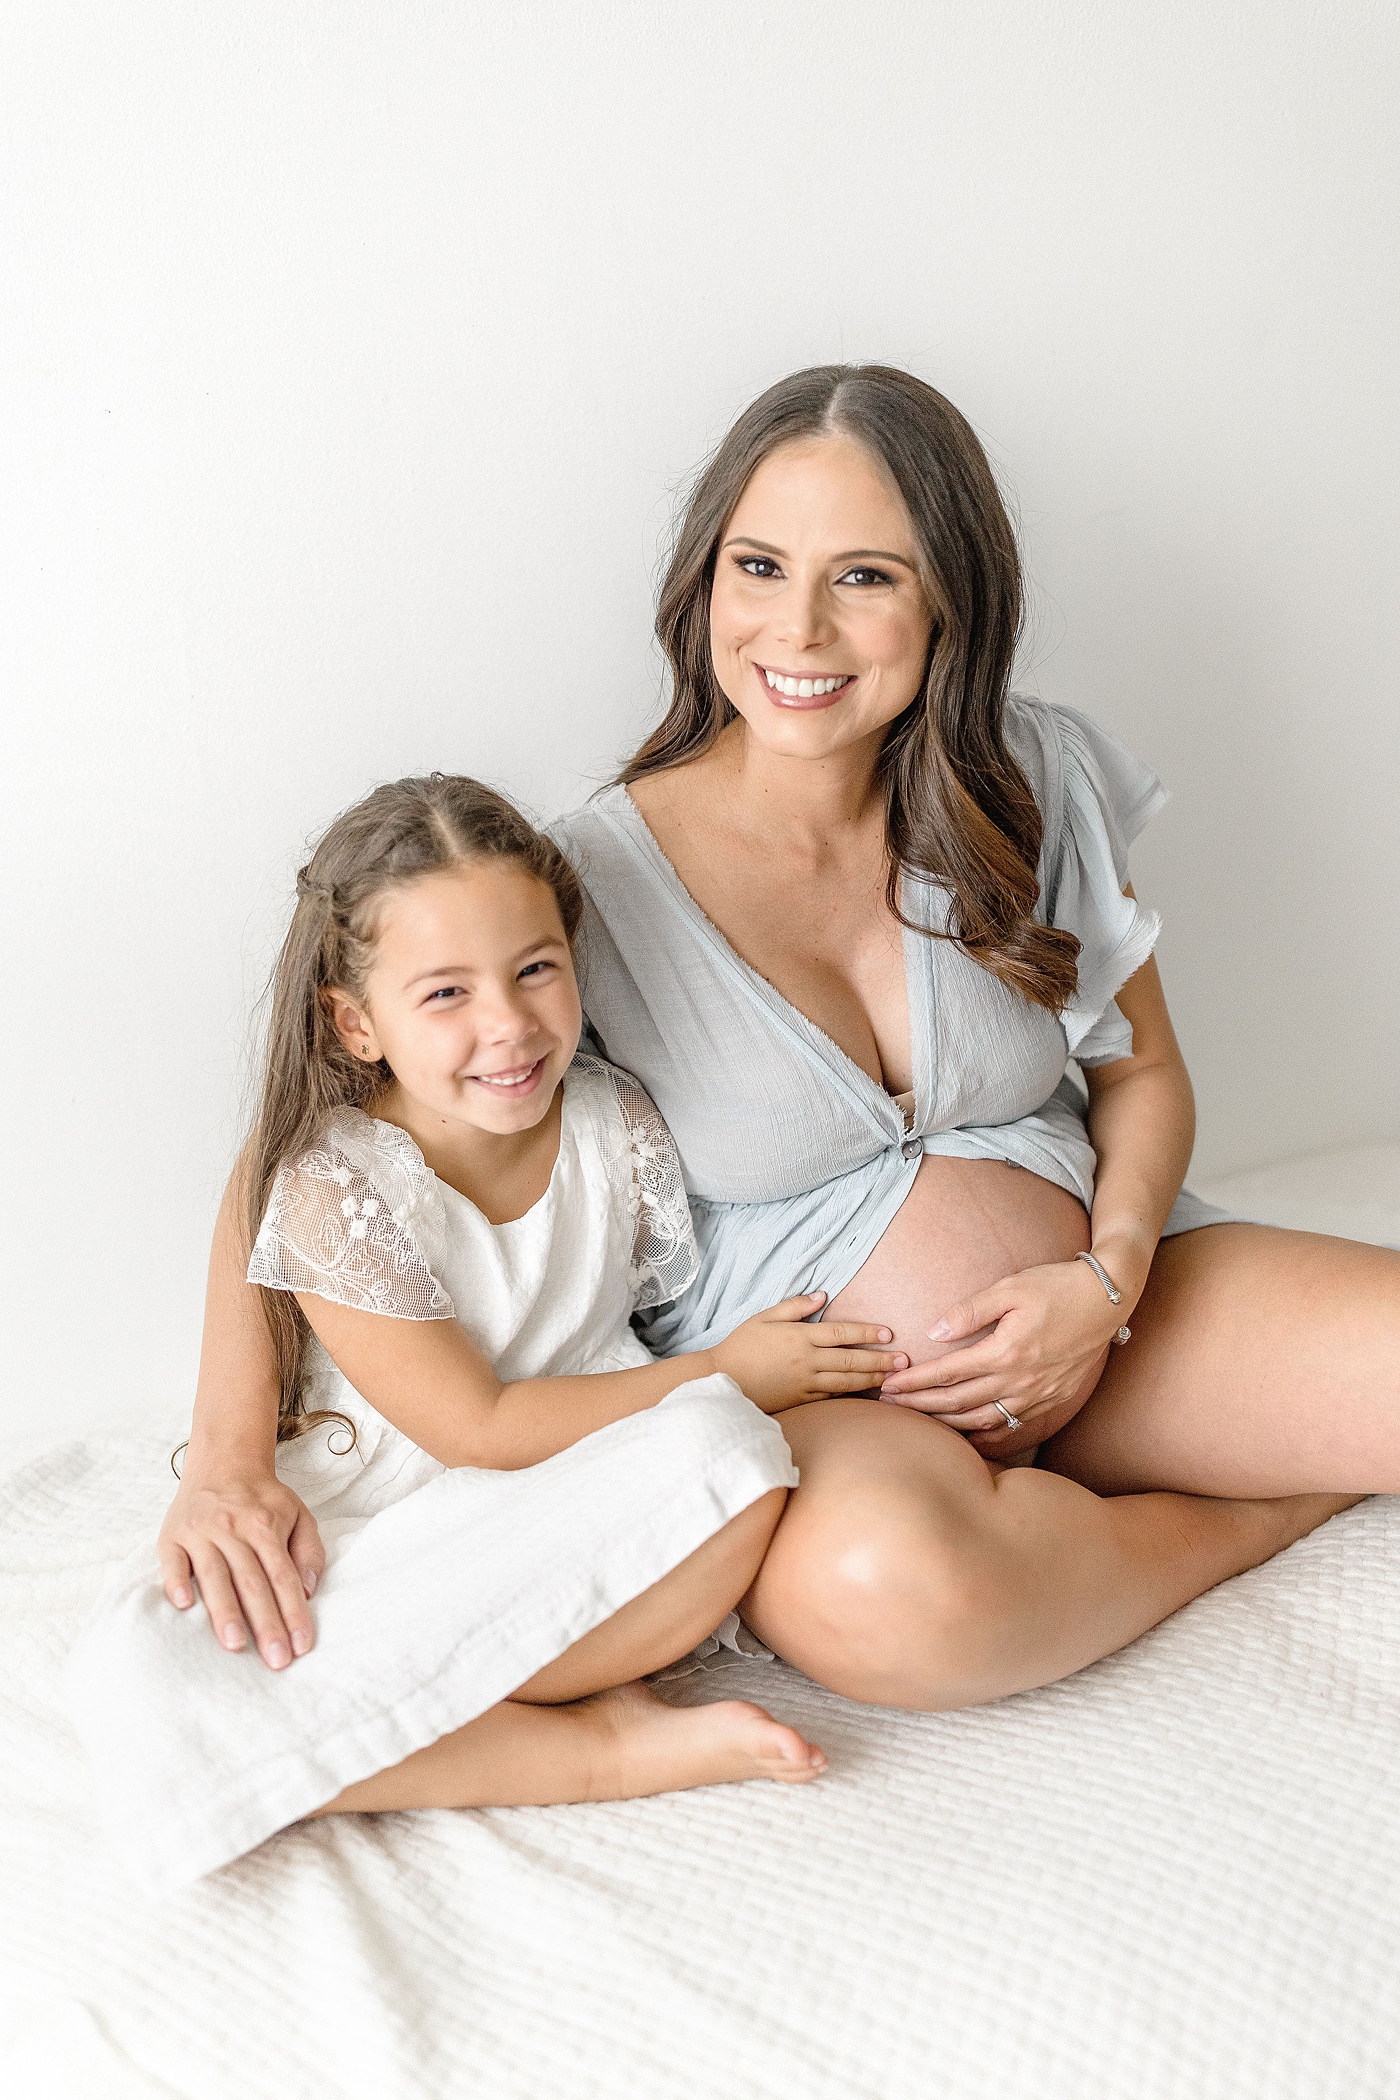 Mom and daughter smile during Miami maternity session in studio. Photo by Ivanna Vidal Photography.